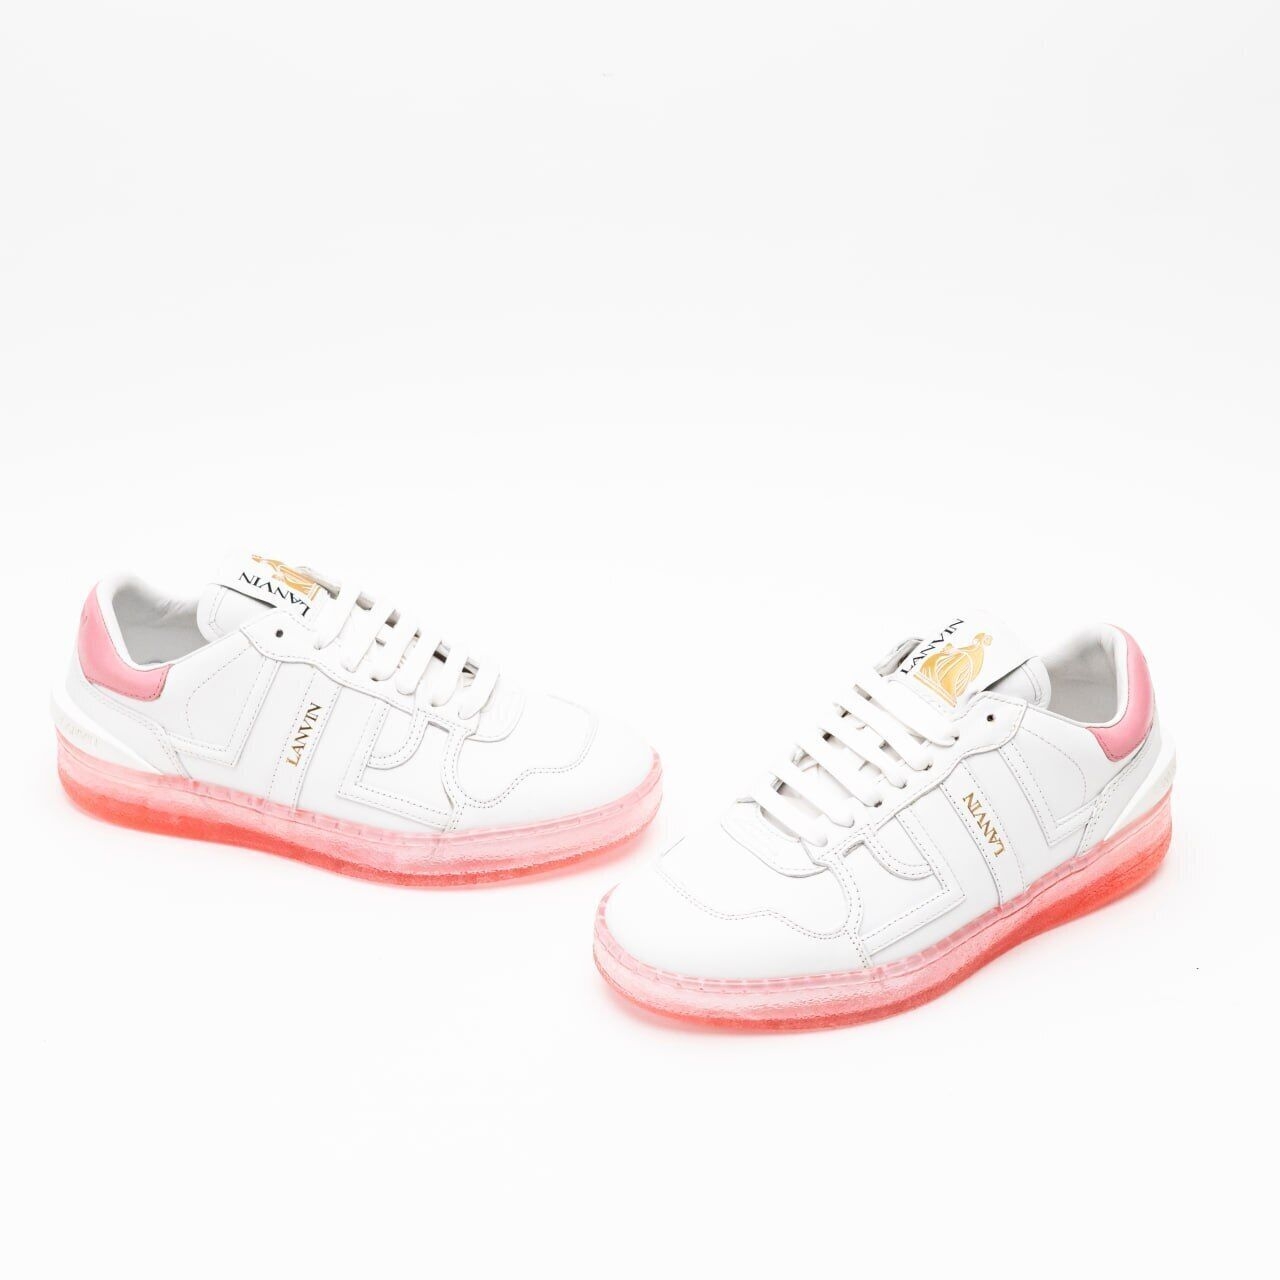 Lanvin Tennis Leather Clay Tennis Sneakers White Pink Women